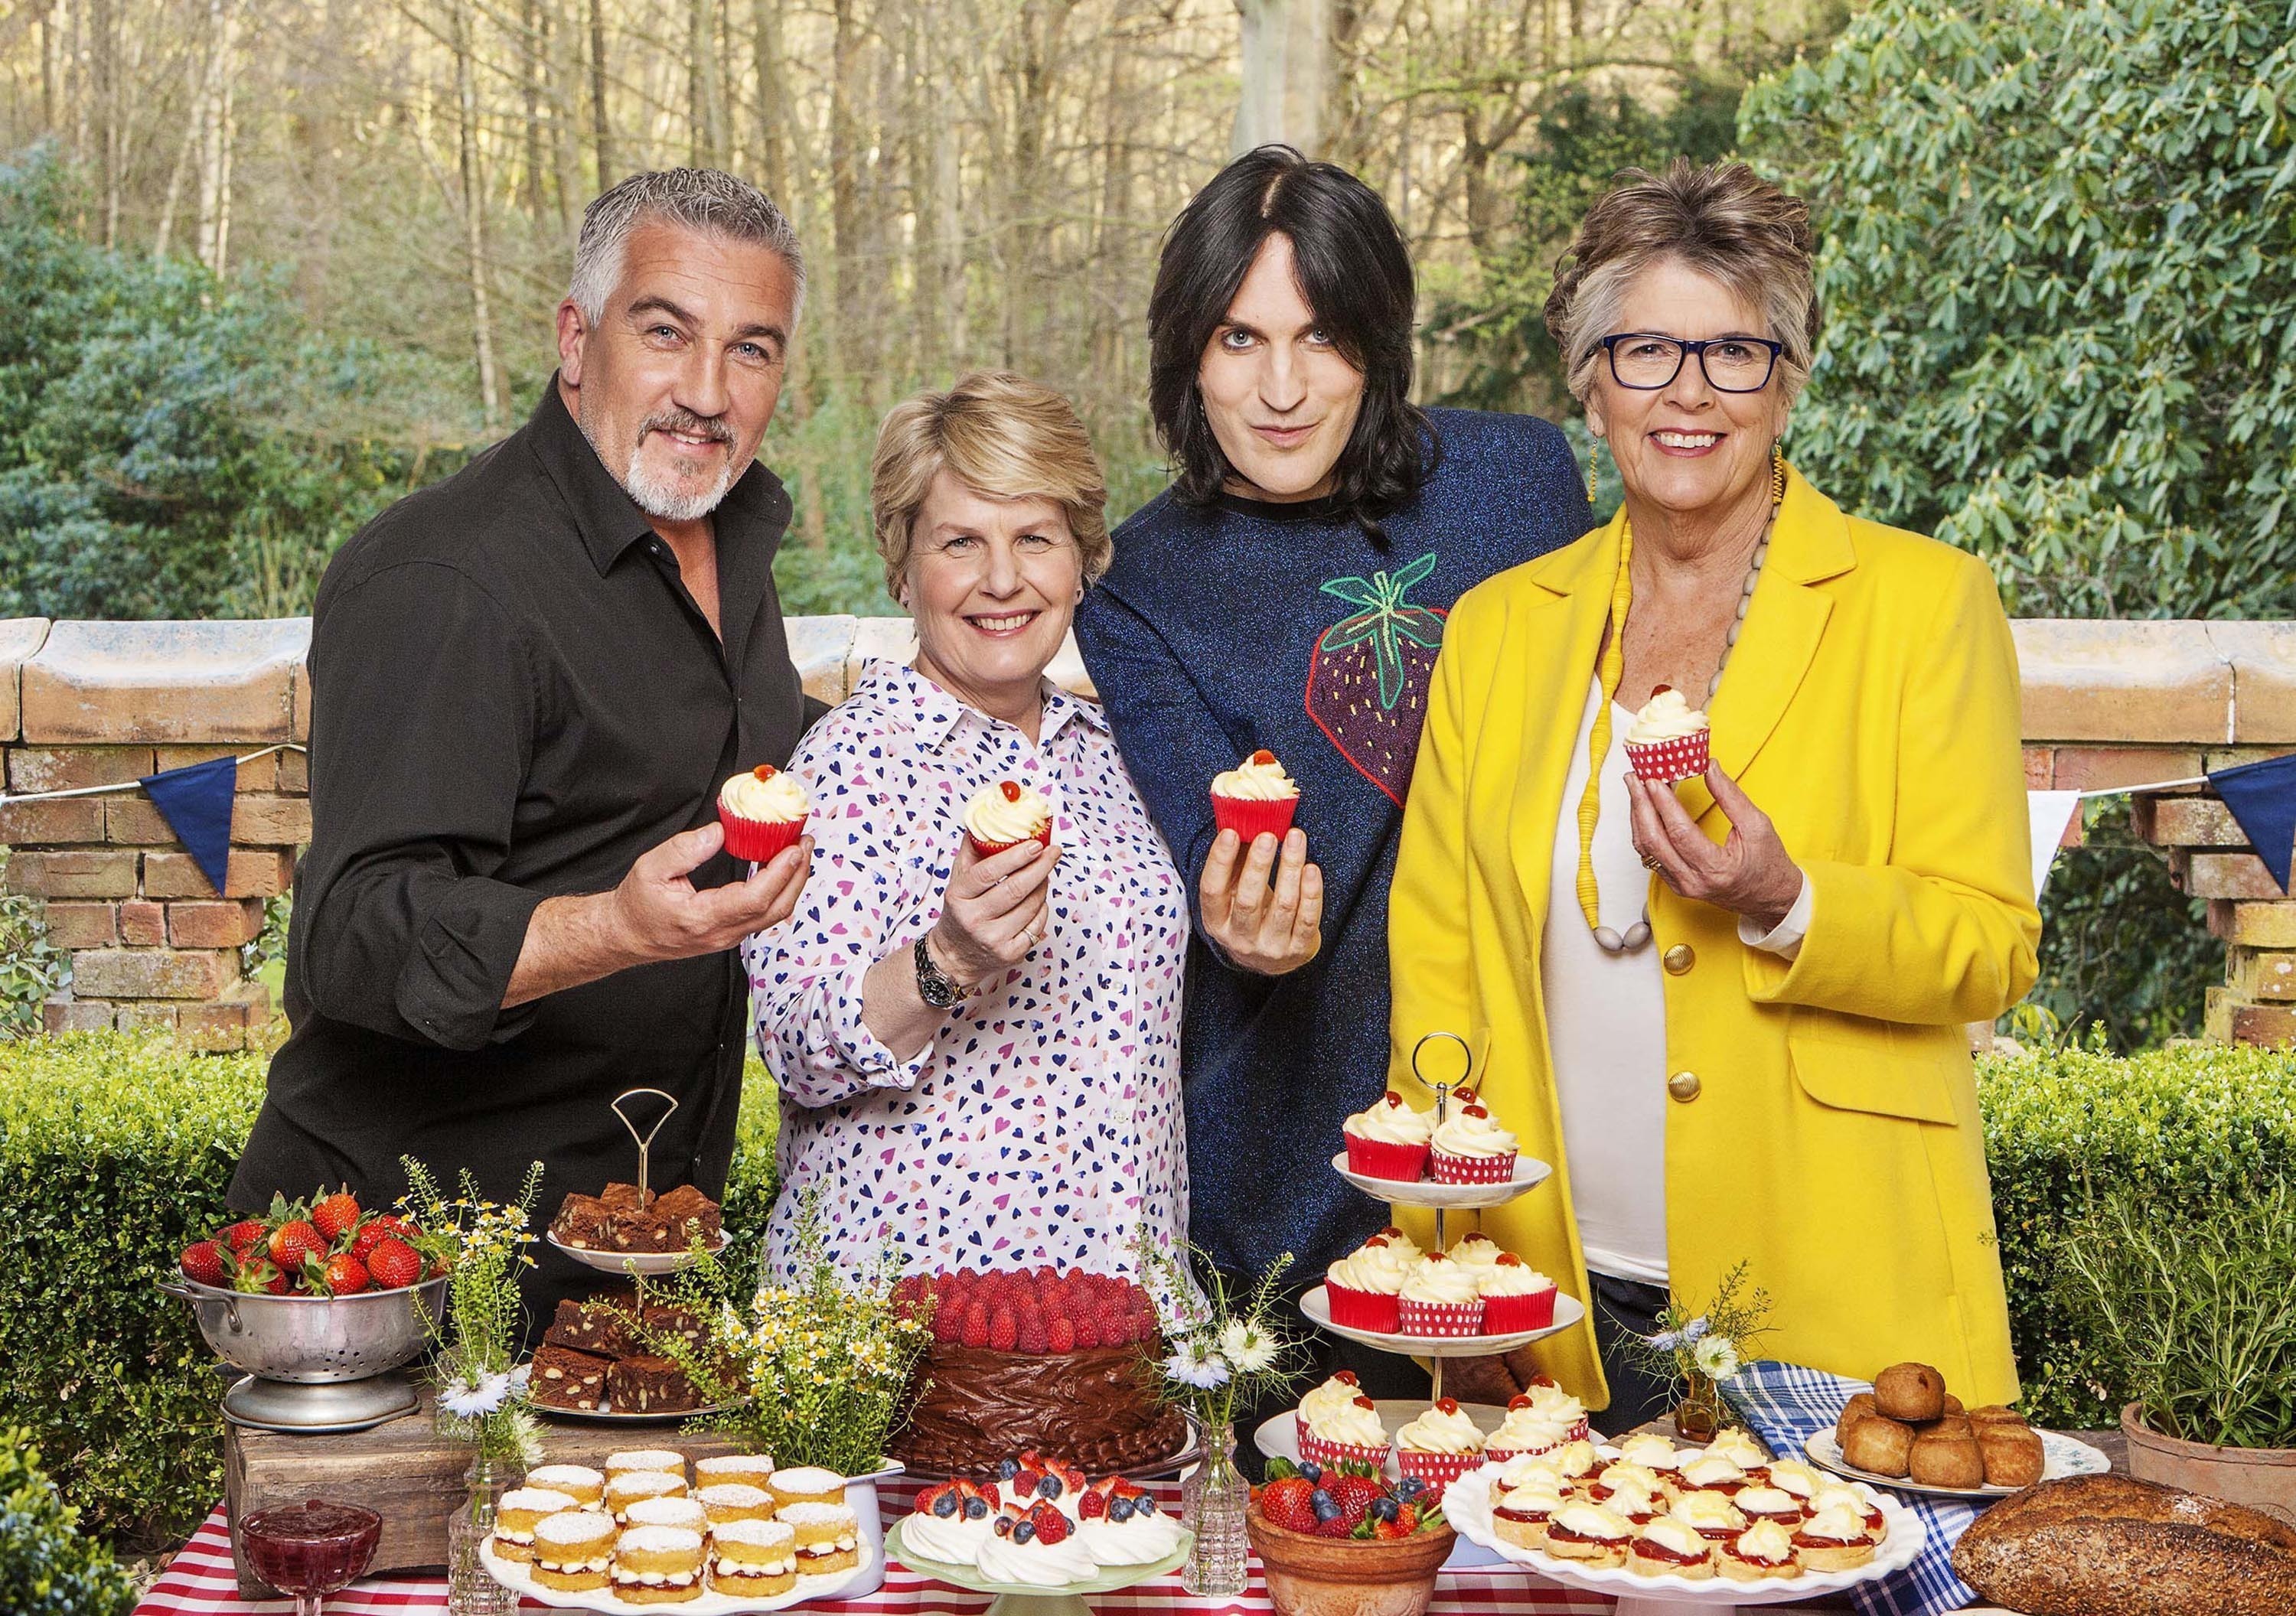 The judges and presenters for The Great British Bake Off (left to right) Paul Hollywood, Sandi Toksvig, Noel Fielding and Prue Leith ( Love Productions/Channel 4/Mark Bourdillon/PA Wire)